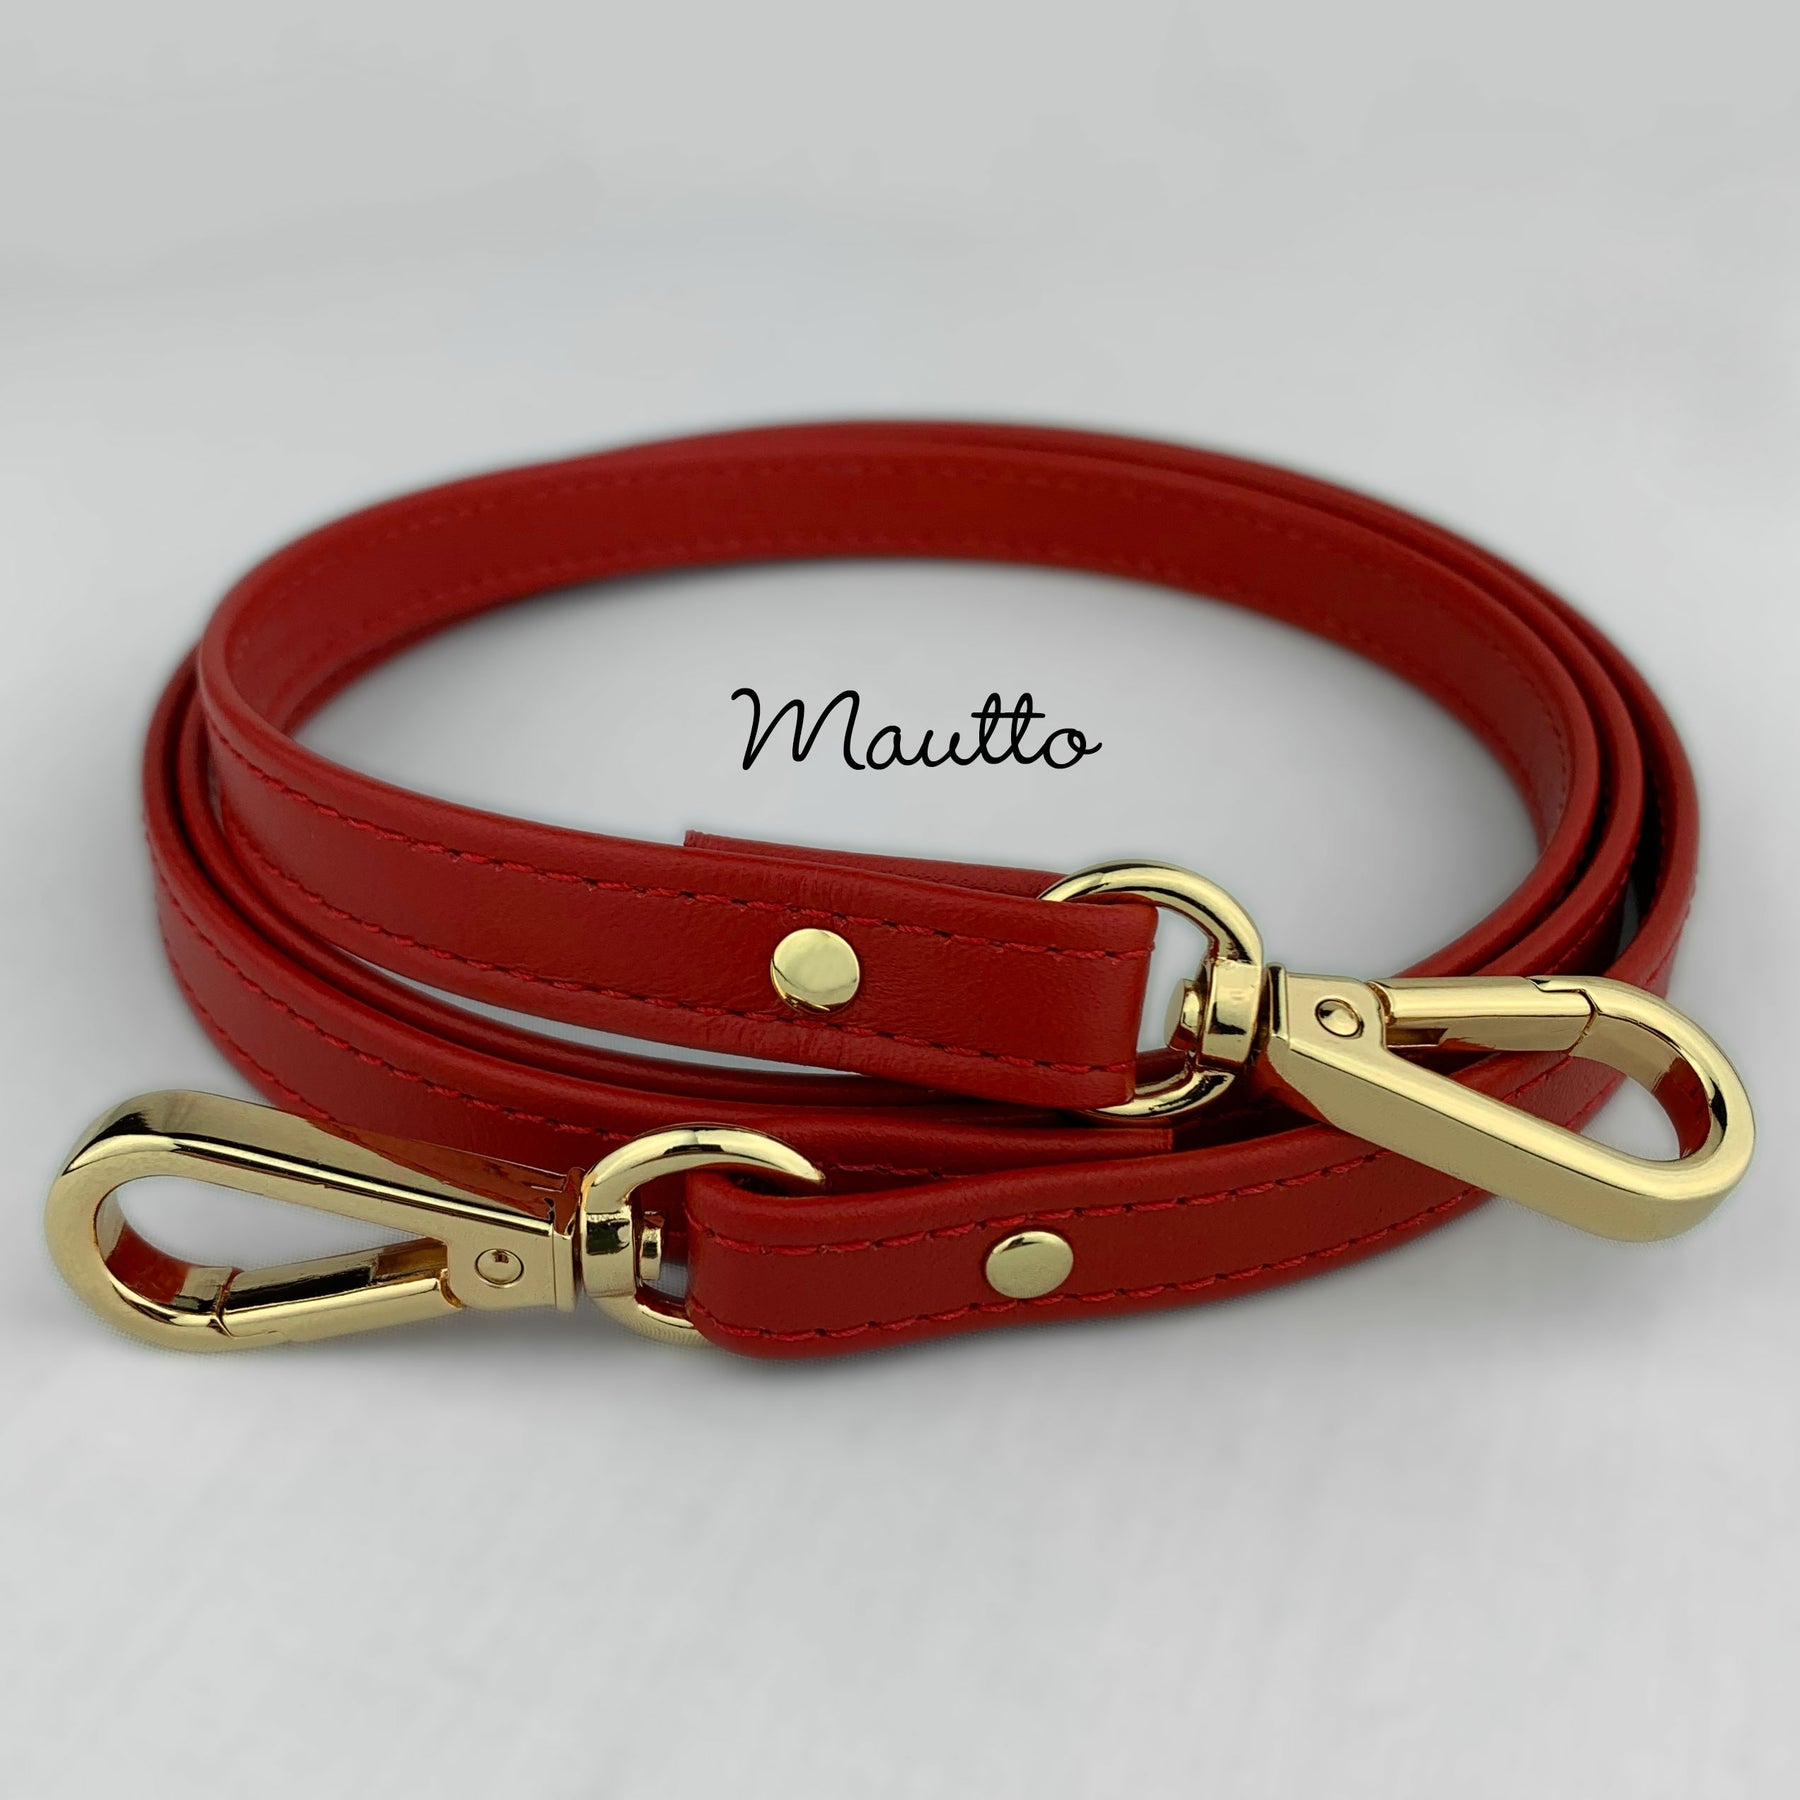 Petite Leather Strap - Extra Long Crossbody Length - Modern Colors Red Leather / #16 Gold-Tone